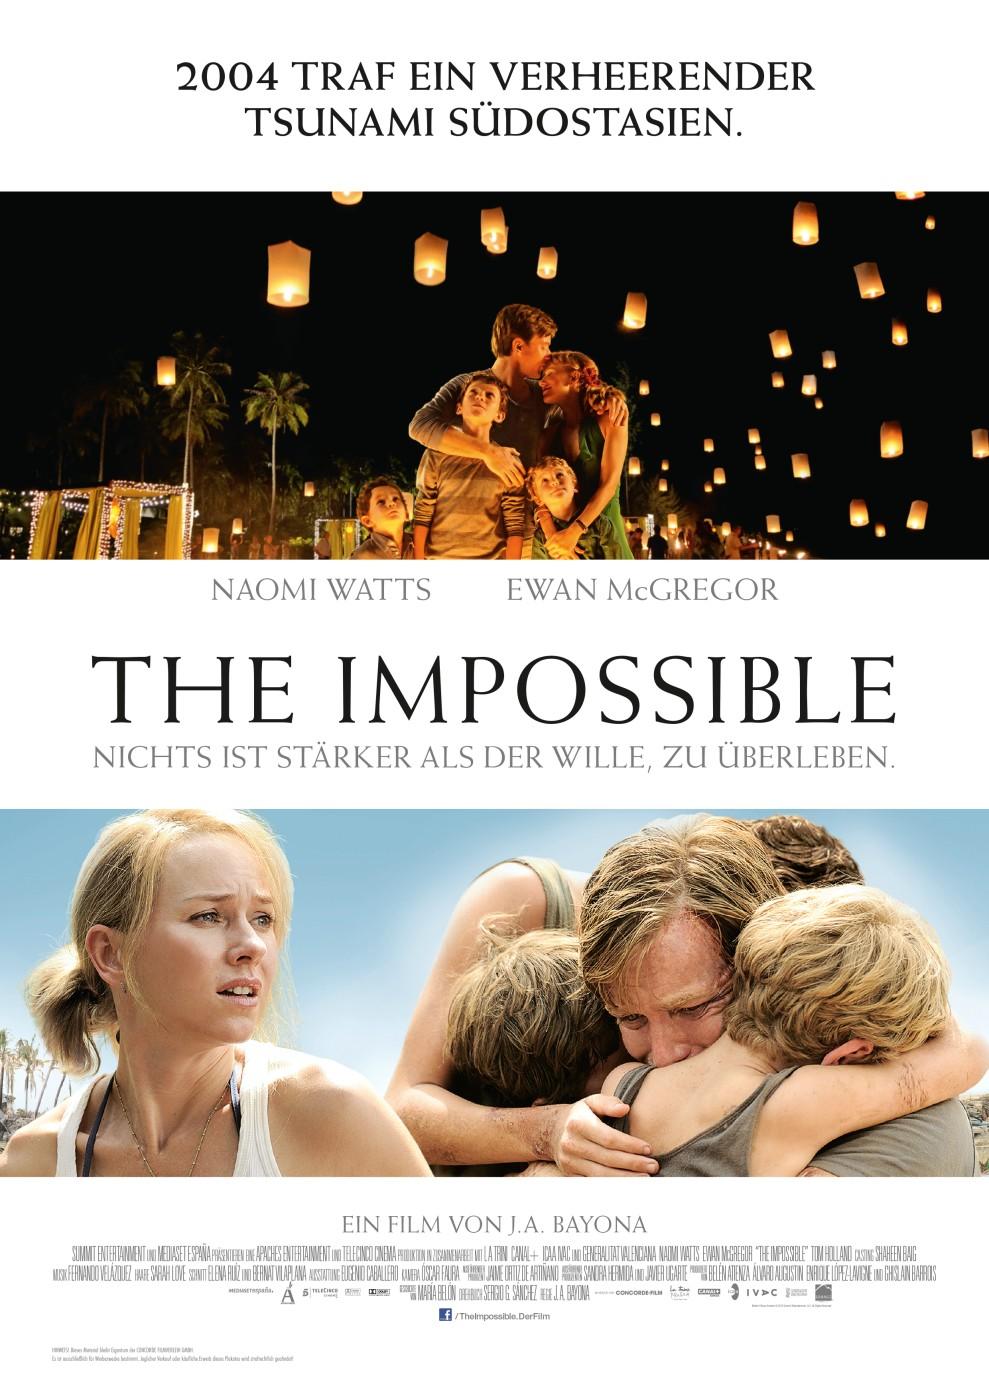 The Impossible (Poster)